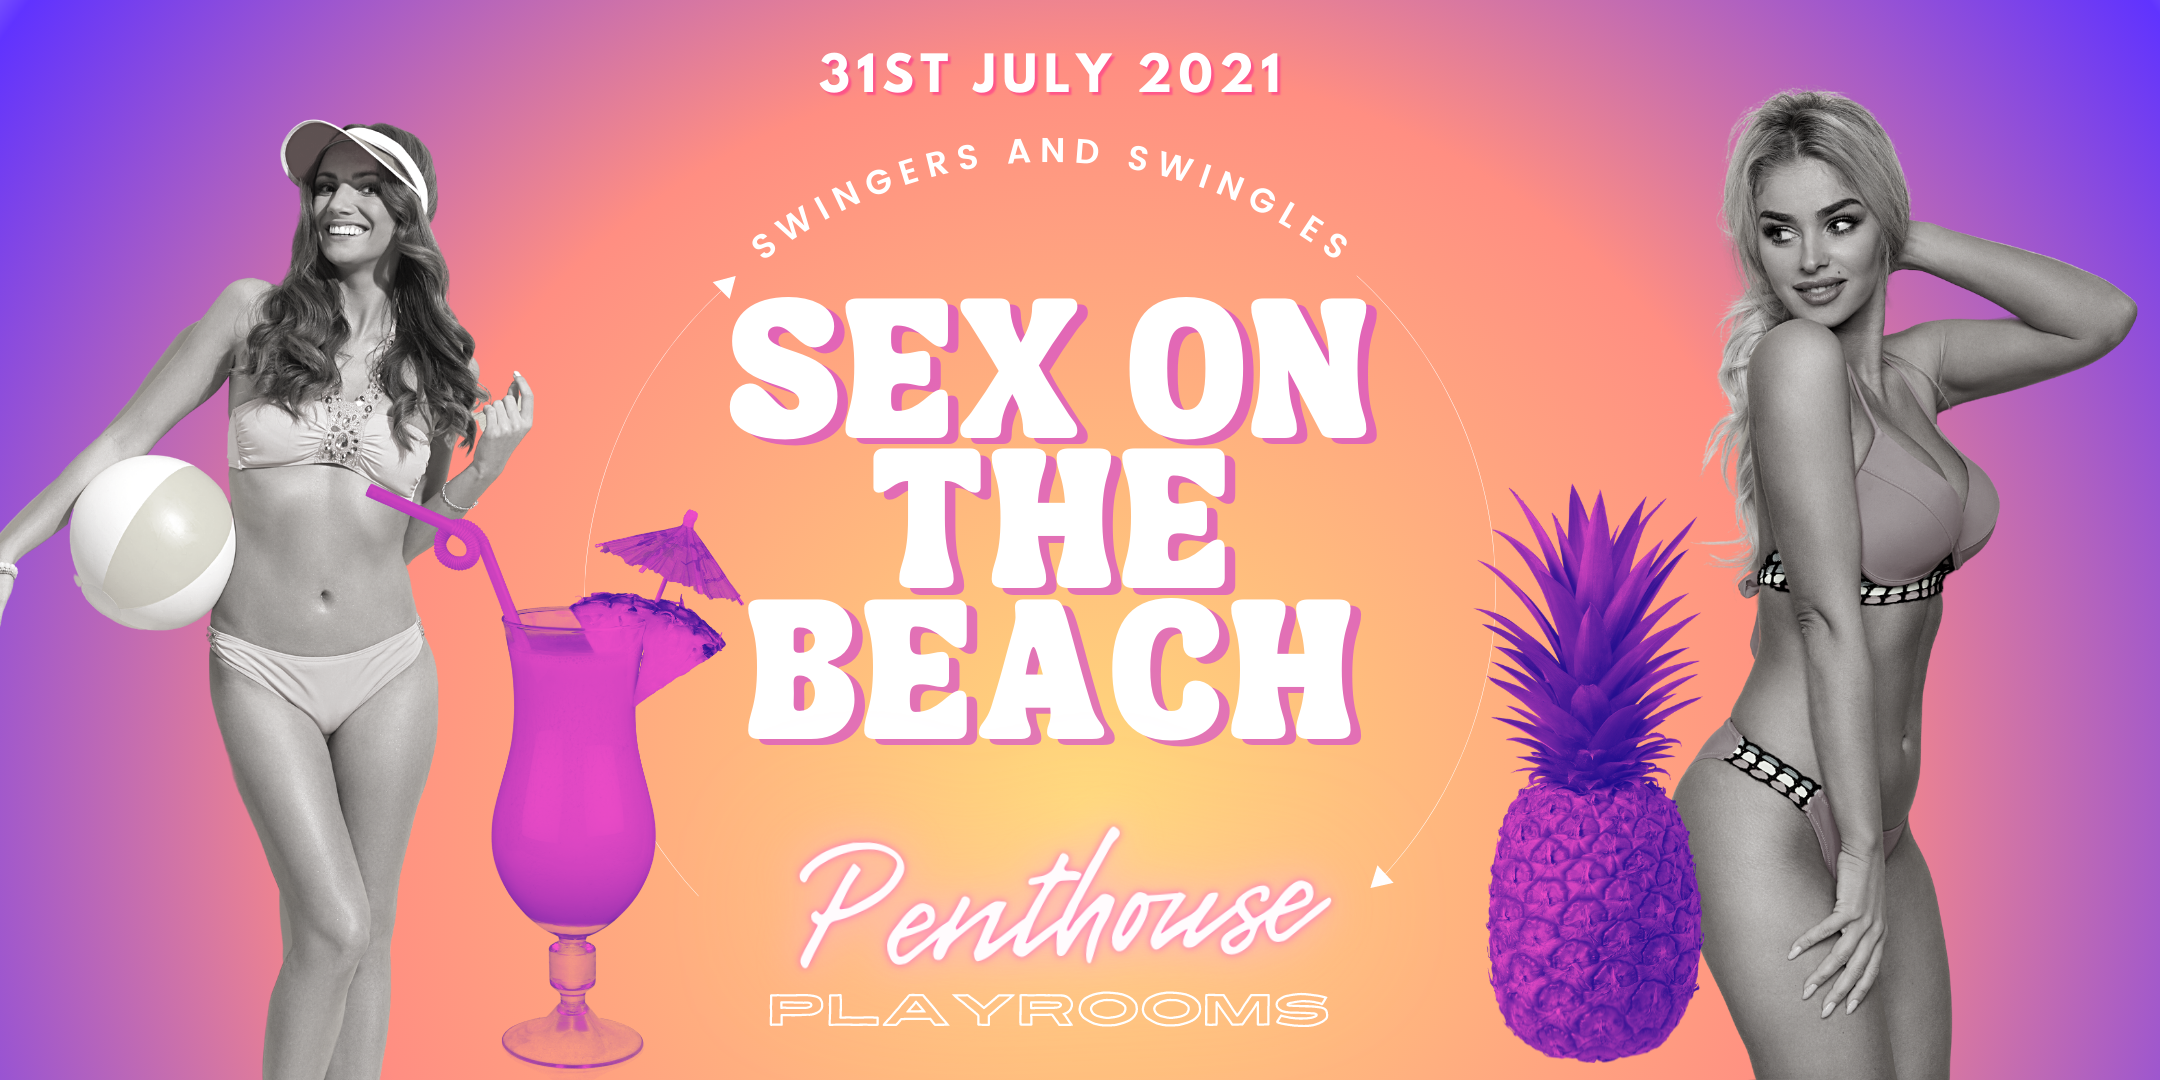 Sex on The Beach Penthouse Playrooms Bikini Beach Party picture